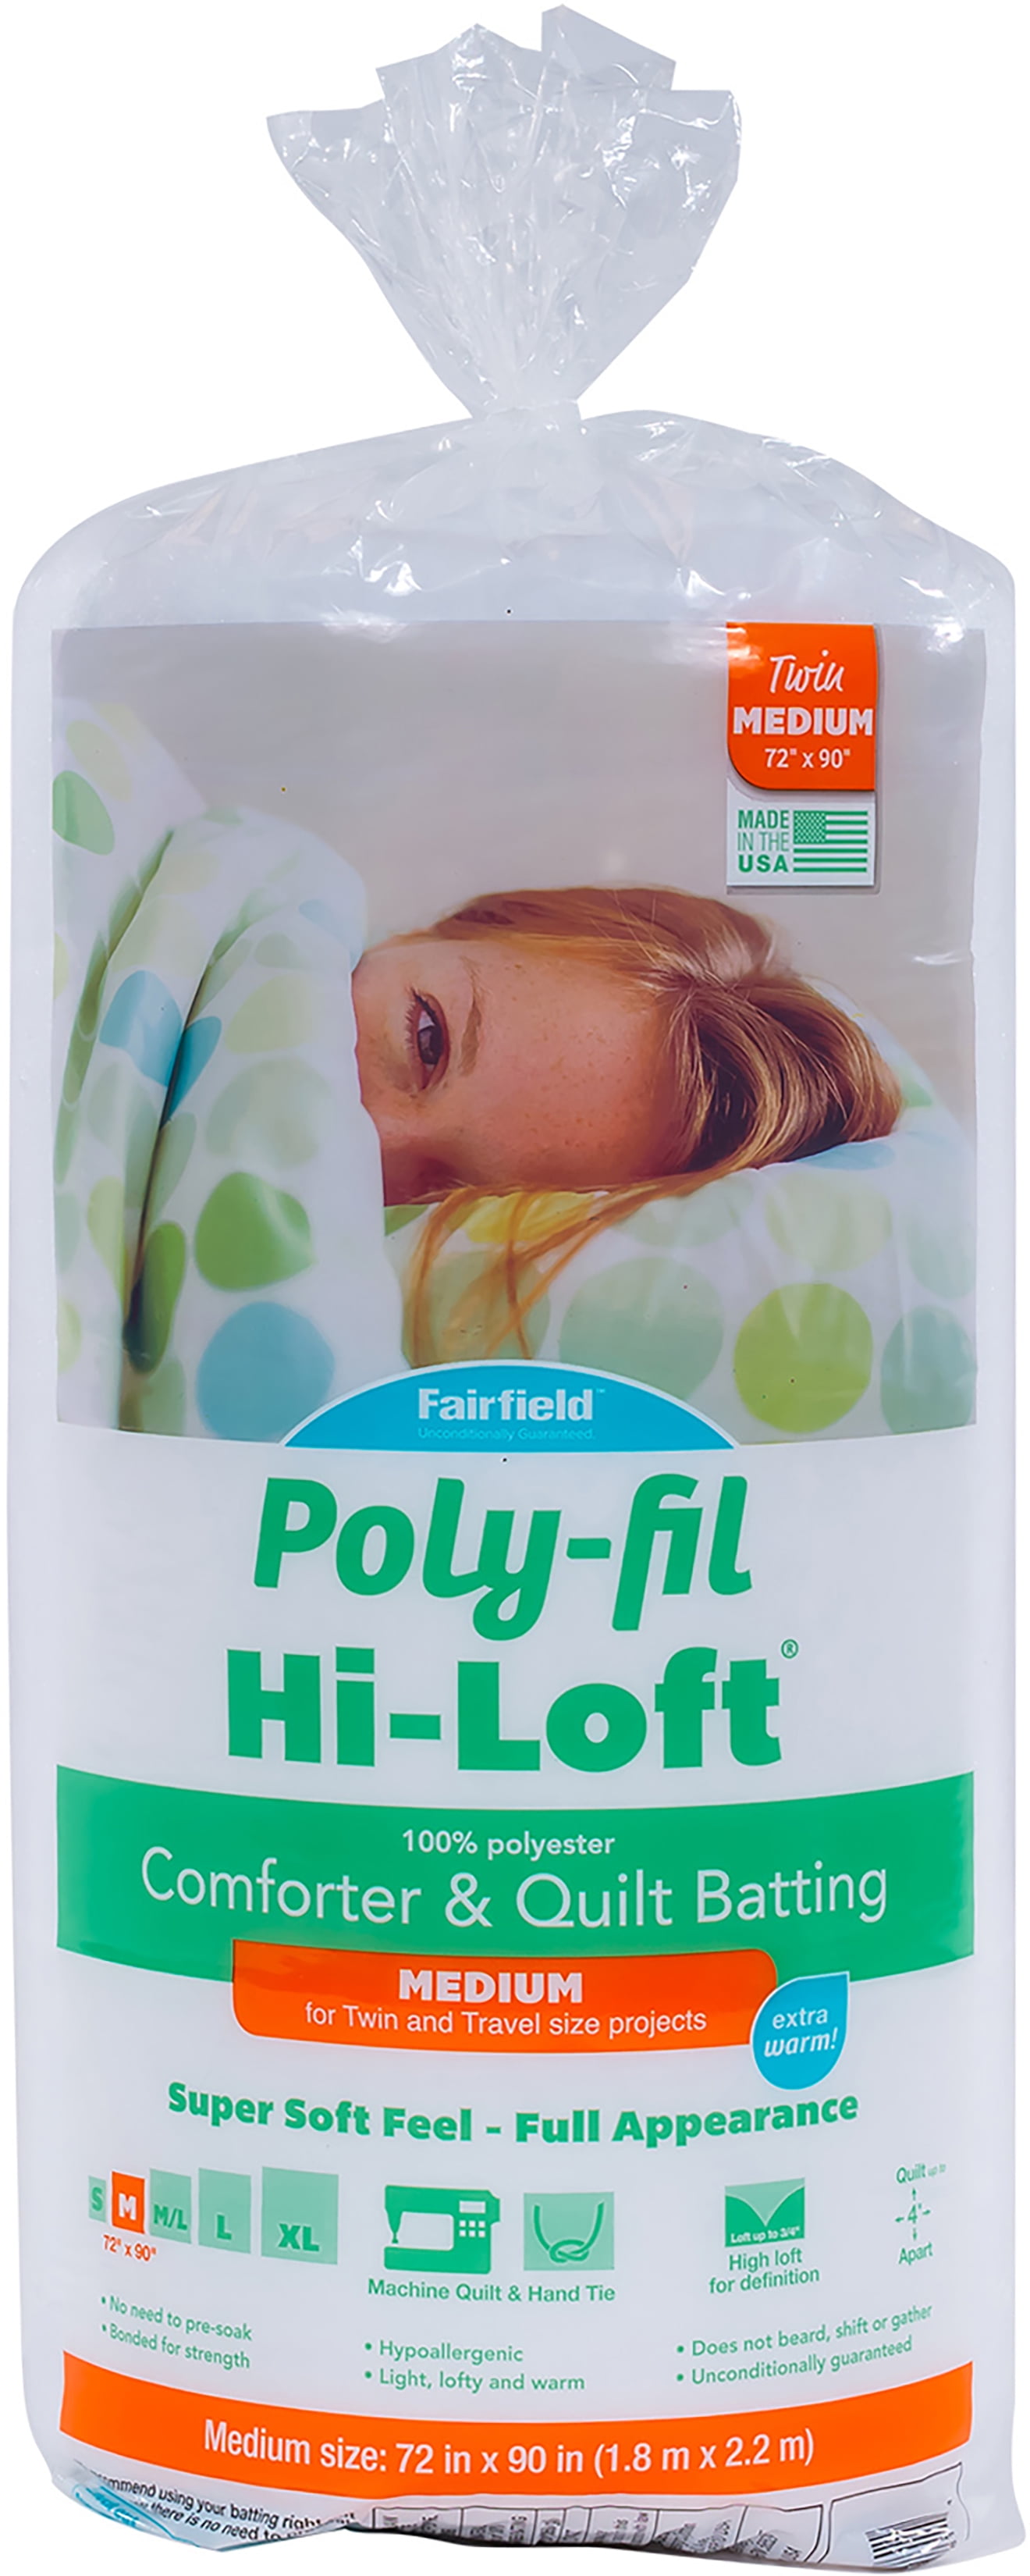 Fairfield Low-Loft Bonded Polyester Batting-Queen Size 90x108